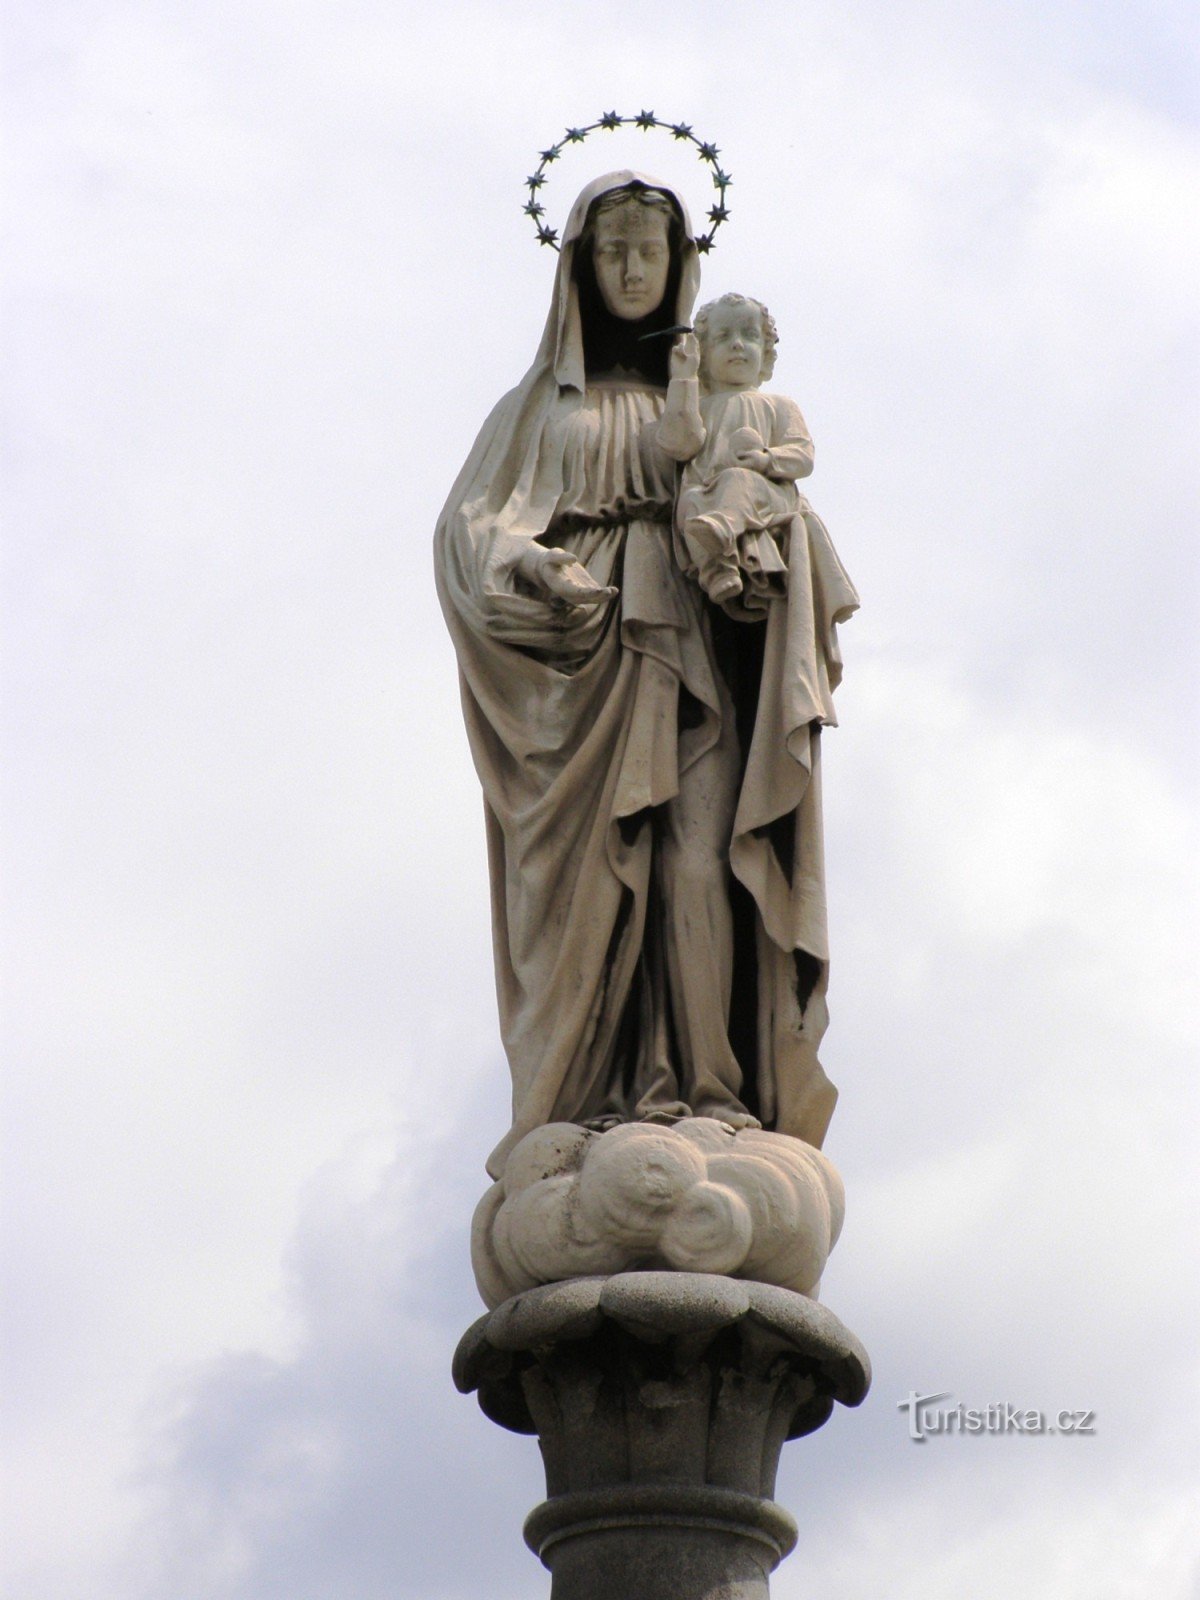 Žulová - a granite column with a statue of Our Lady